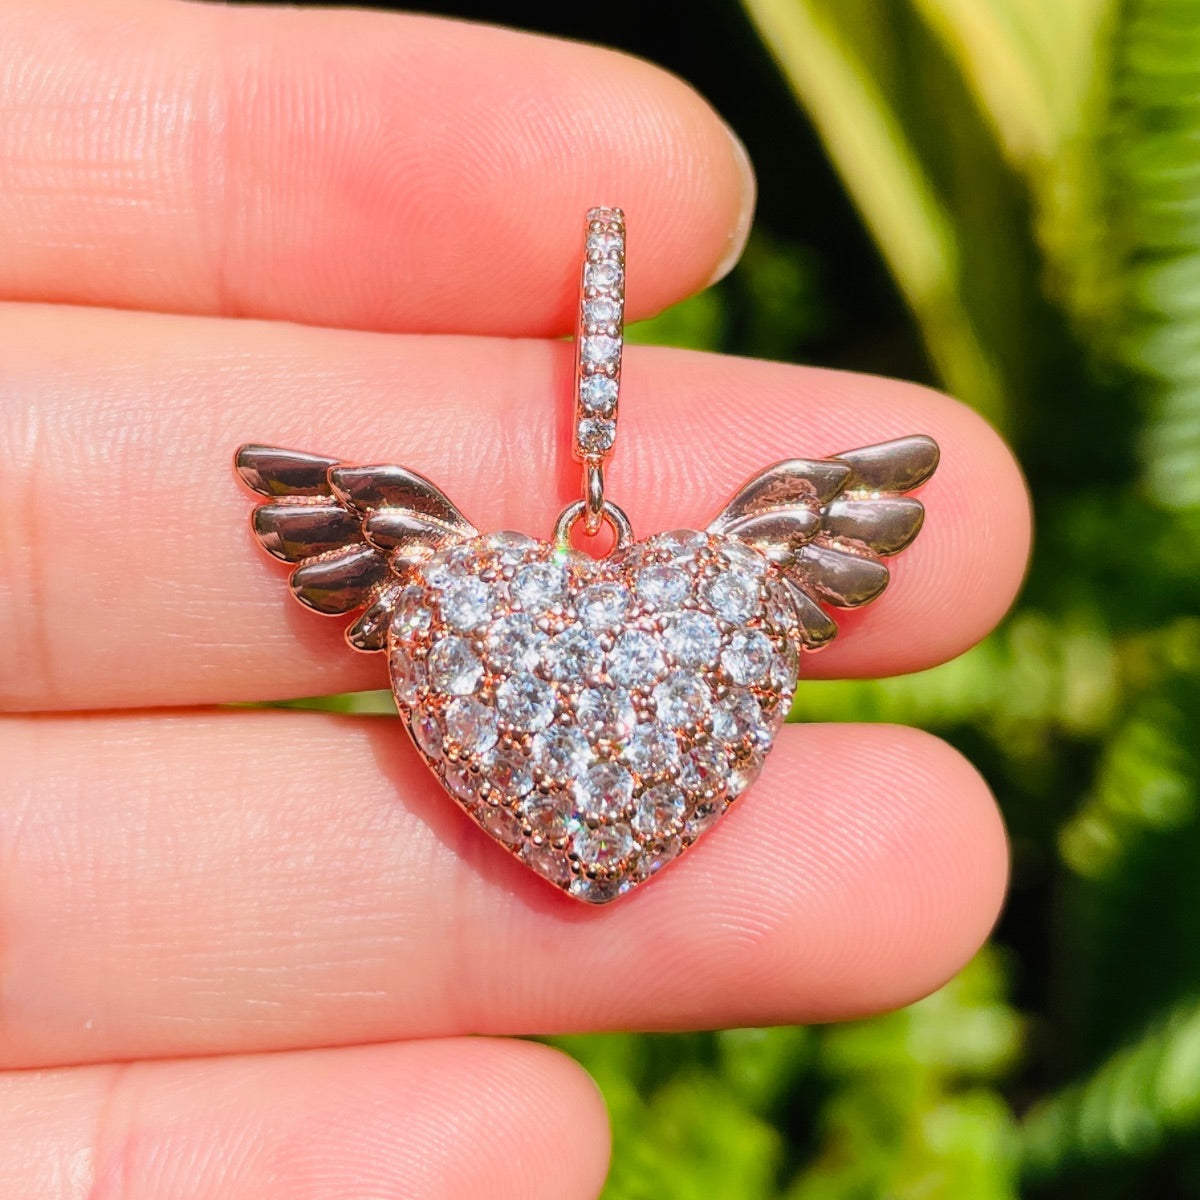 10pcs/lot 29.2*18.6mm CZ Paved Angel Wing 3D Heart Charms Rose Gold CZ Paved Charms Hearts New Charms Arrivals Charms Beads Beyond